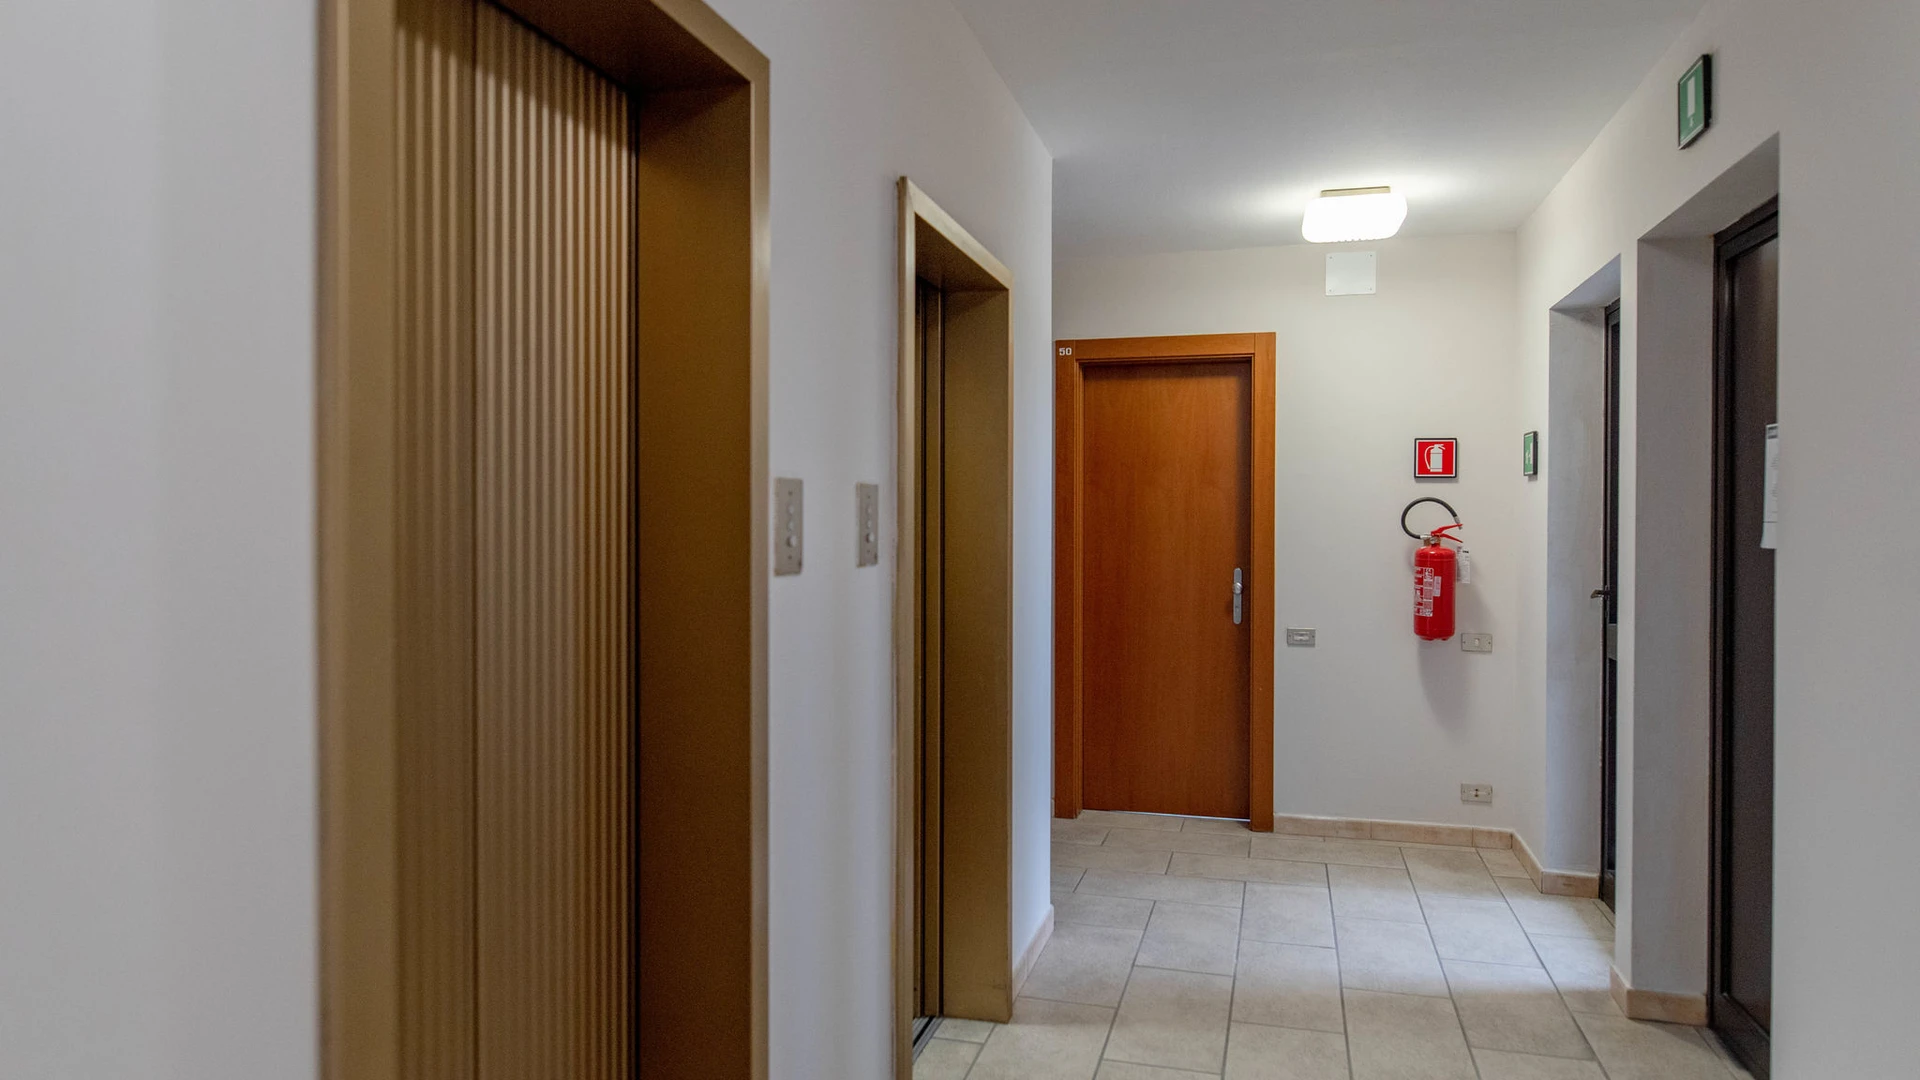 Accommodation in the centre of Turin